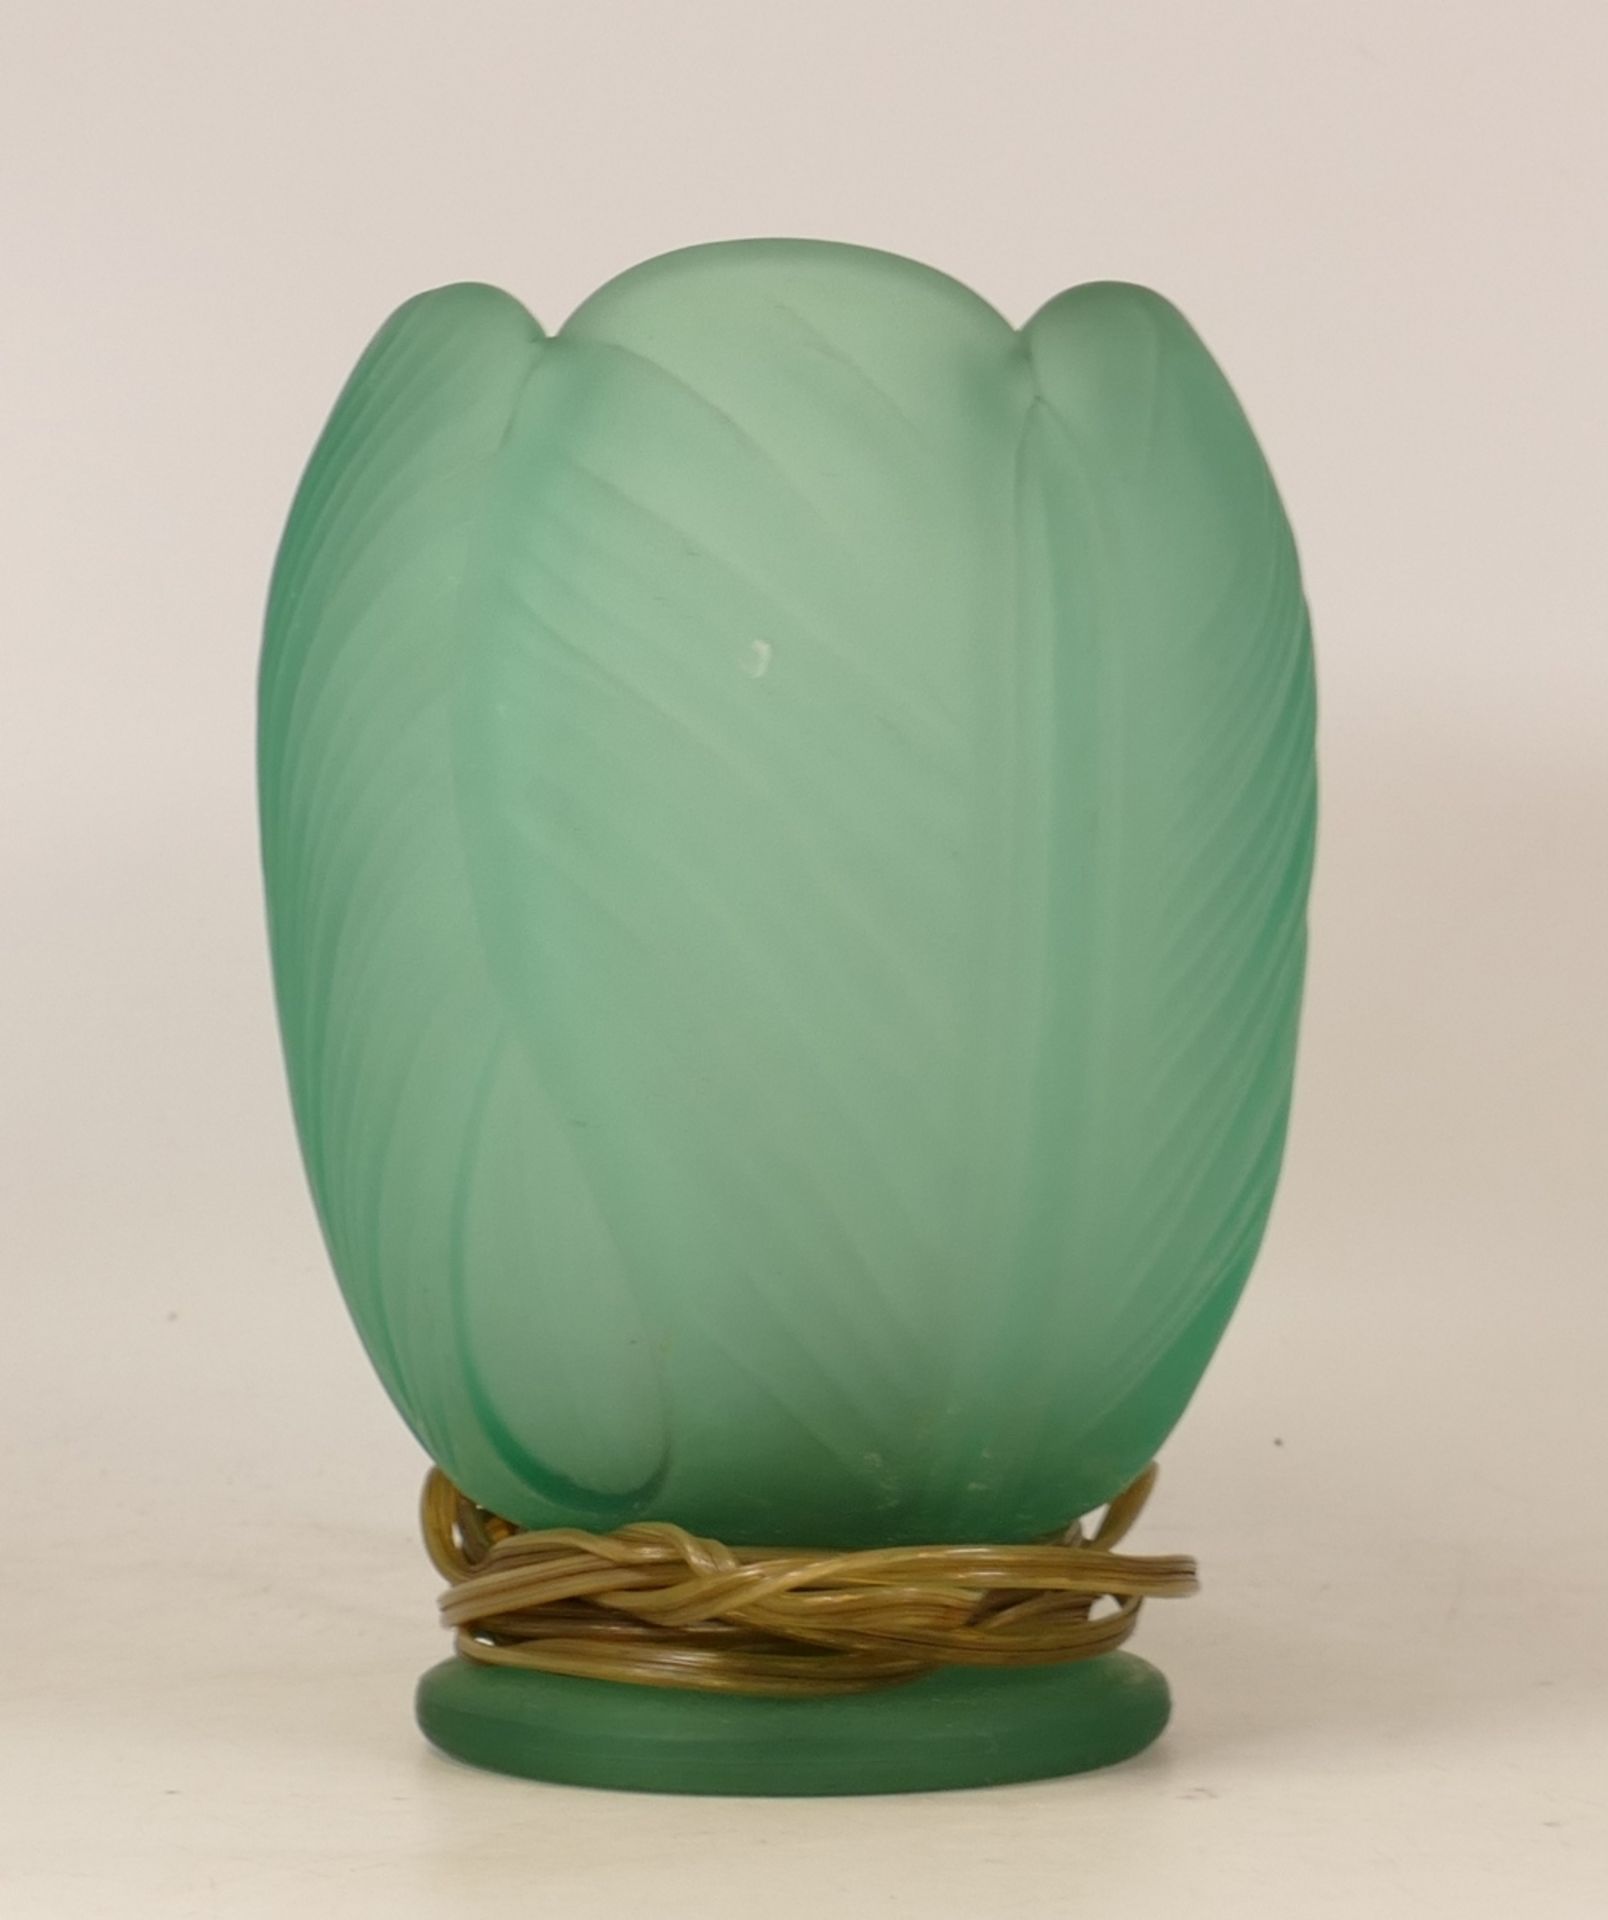 Frosted Green Glass Art Deco Table Lamp, height 21cm